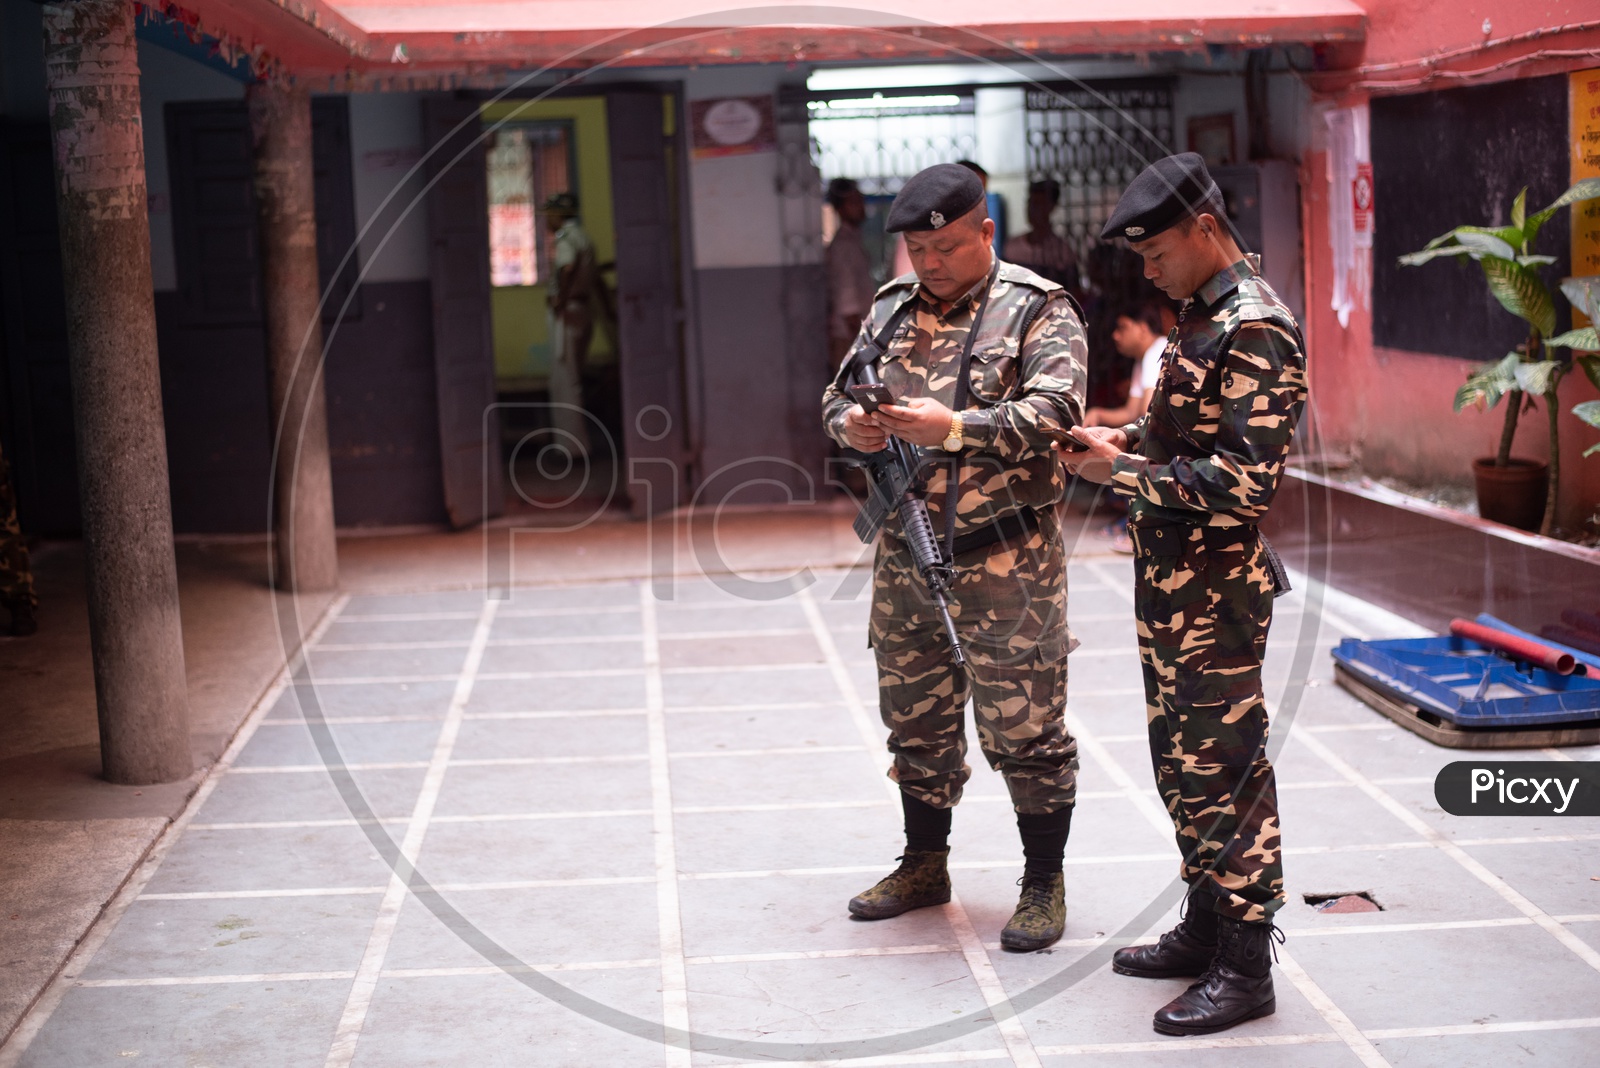 BSF Or Indian Army Security Personals using mobile phones At Polling Stations  in West Bengal Elections For Lok Sabha  General Elections 2019